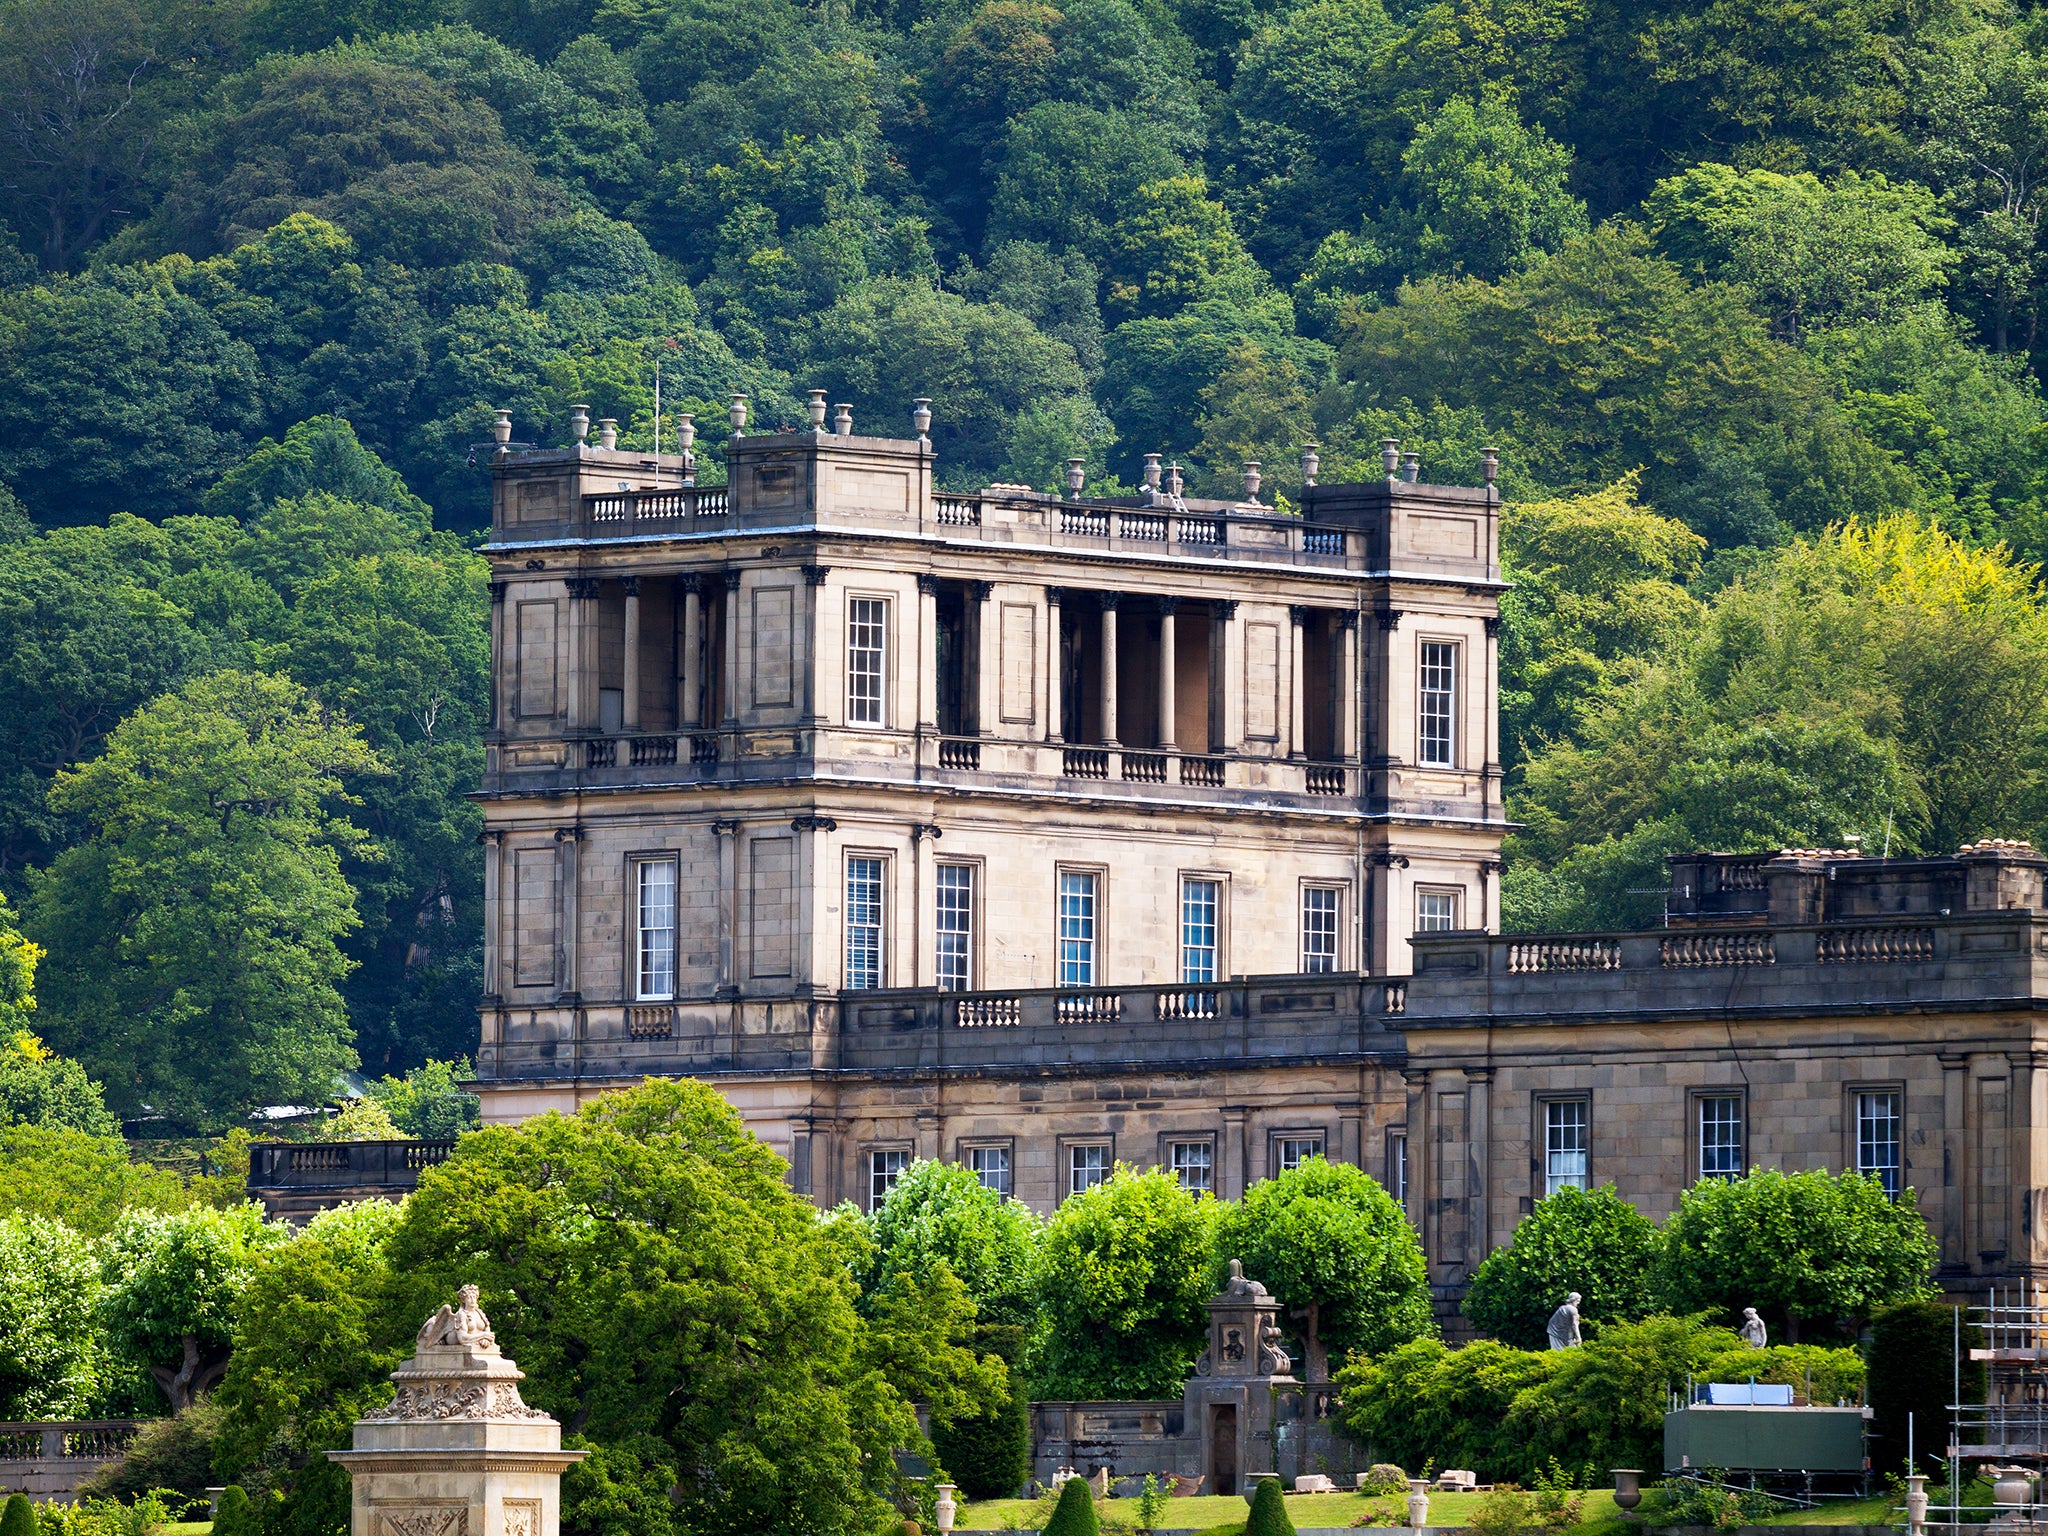 There is over 500 years of history to explore at Chatsworth House